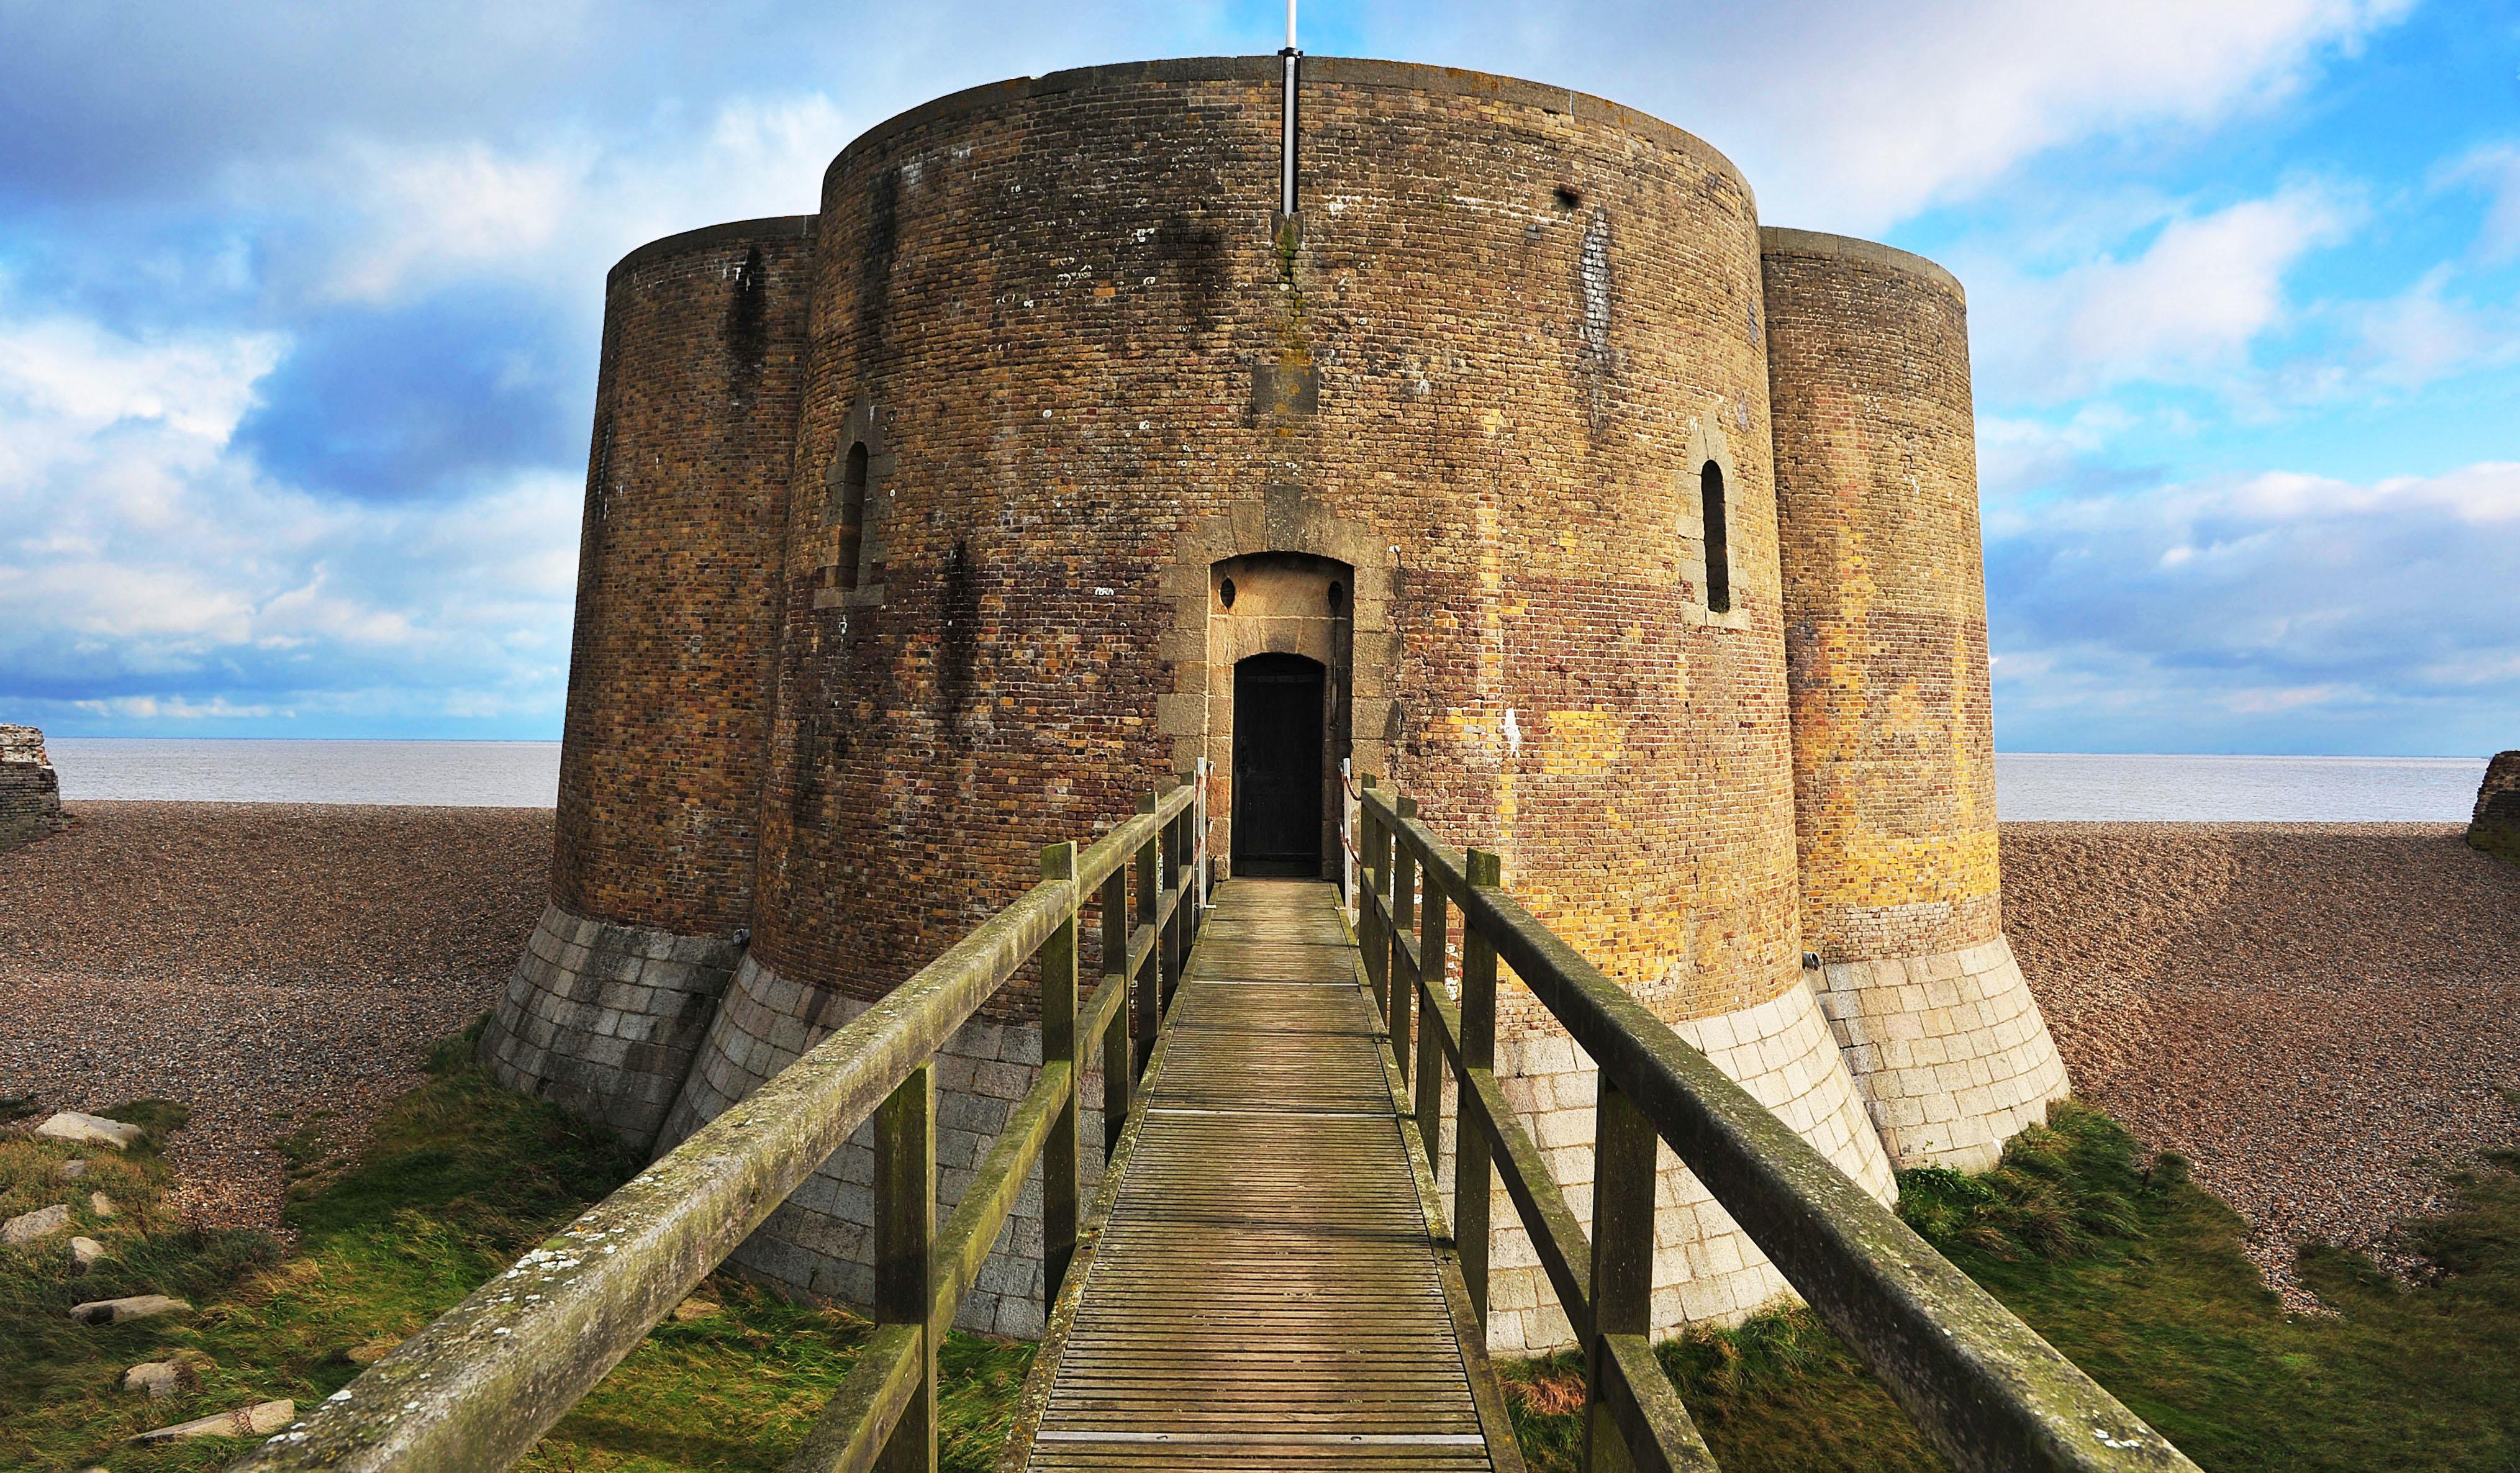 Stay at the Martello Tower in Aldeburgh